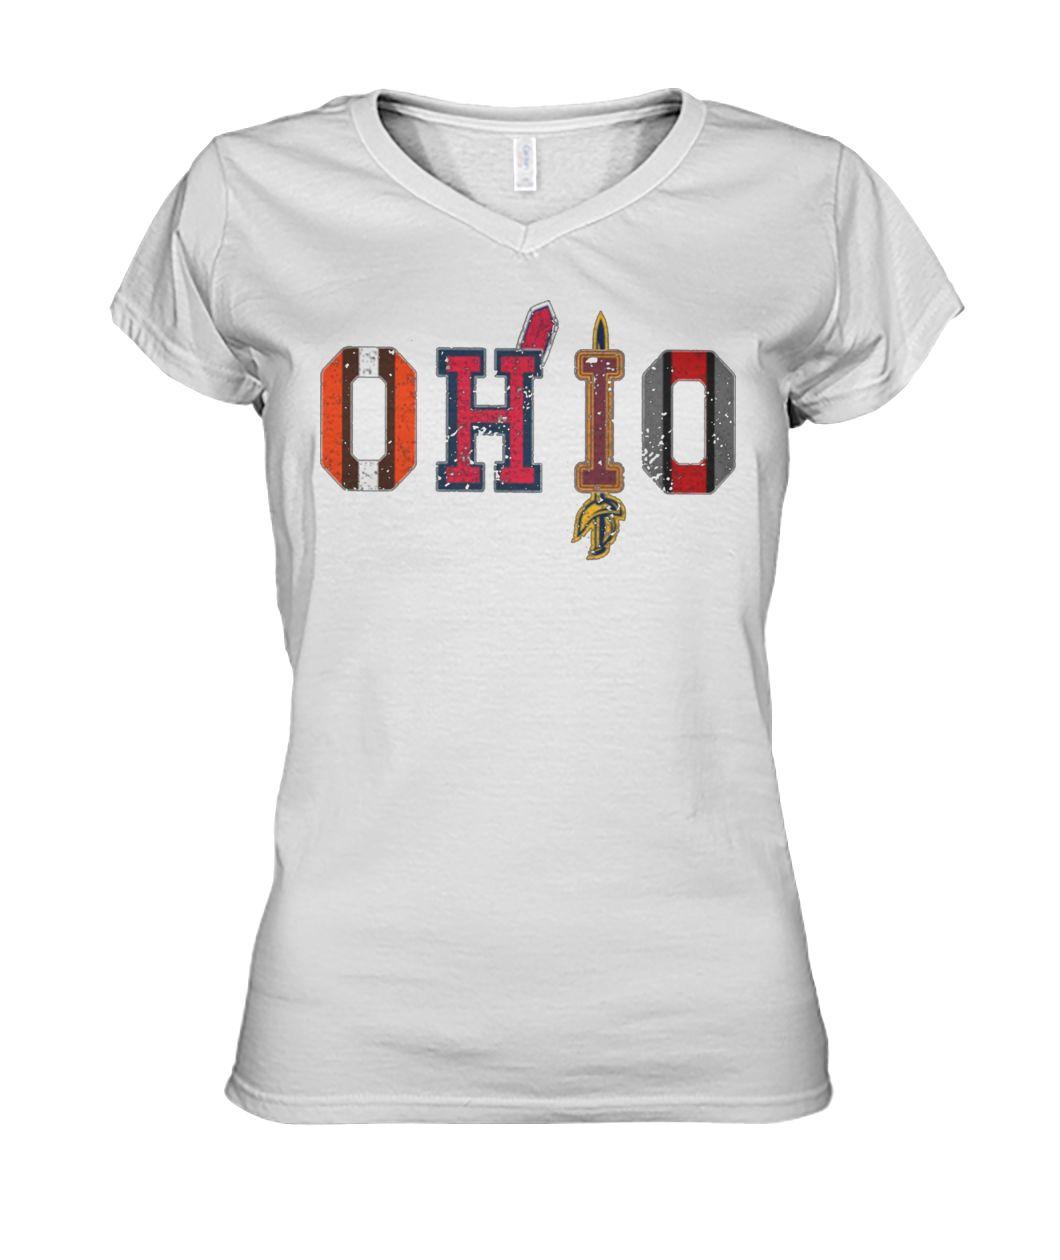 Ohio teams cleveland browns indians cavaliers ohio state women's v-neck